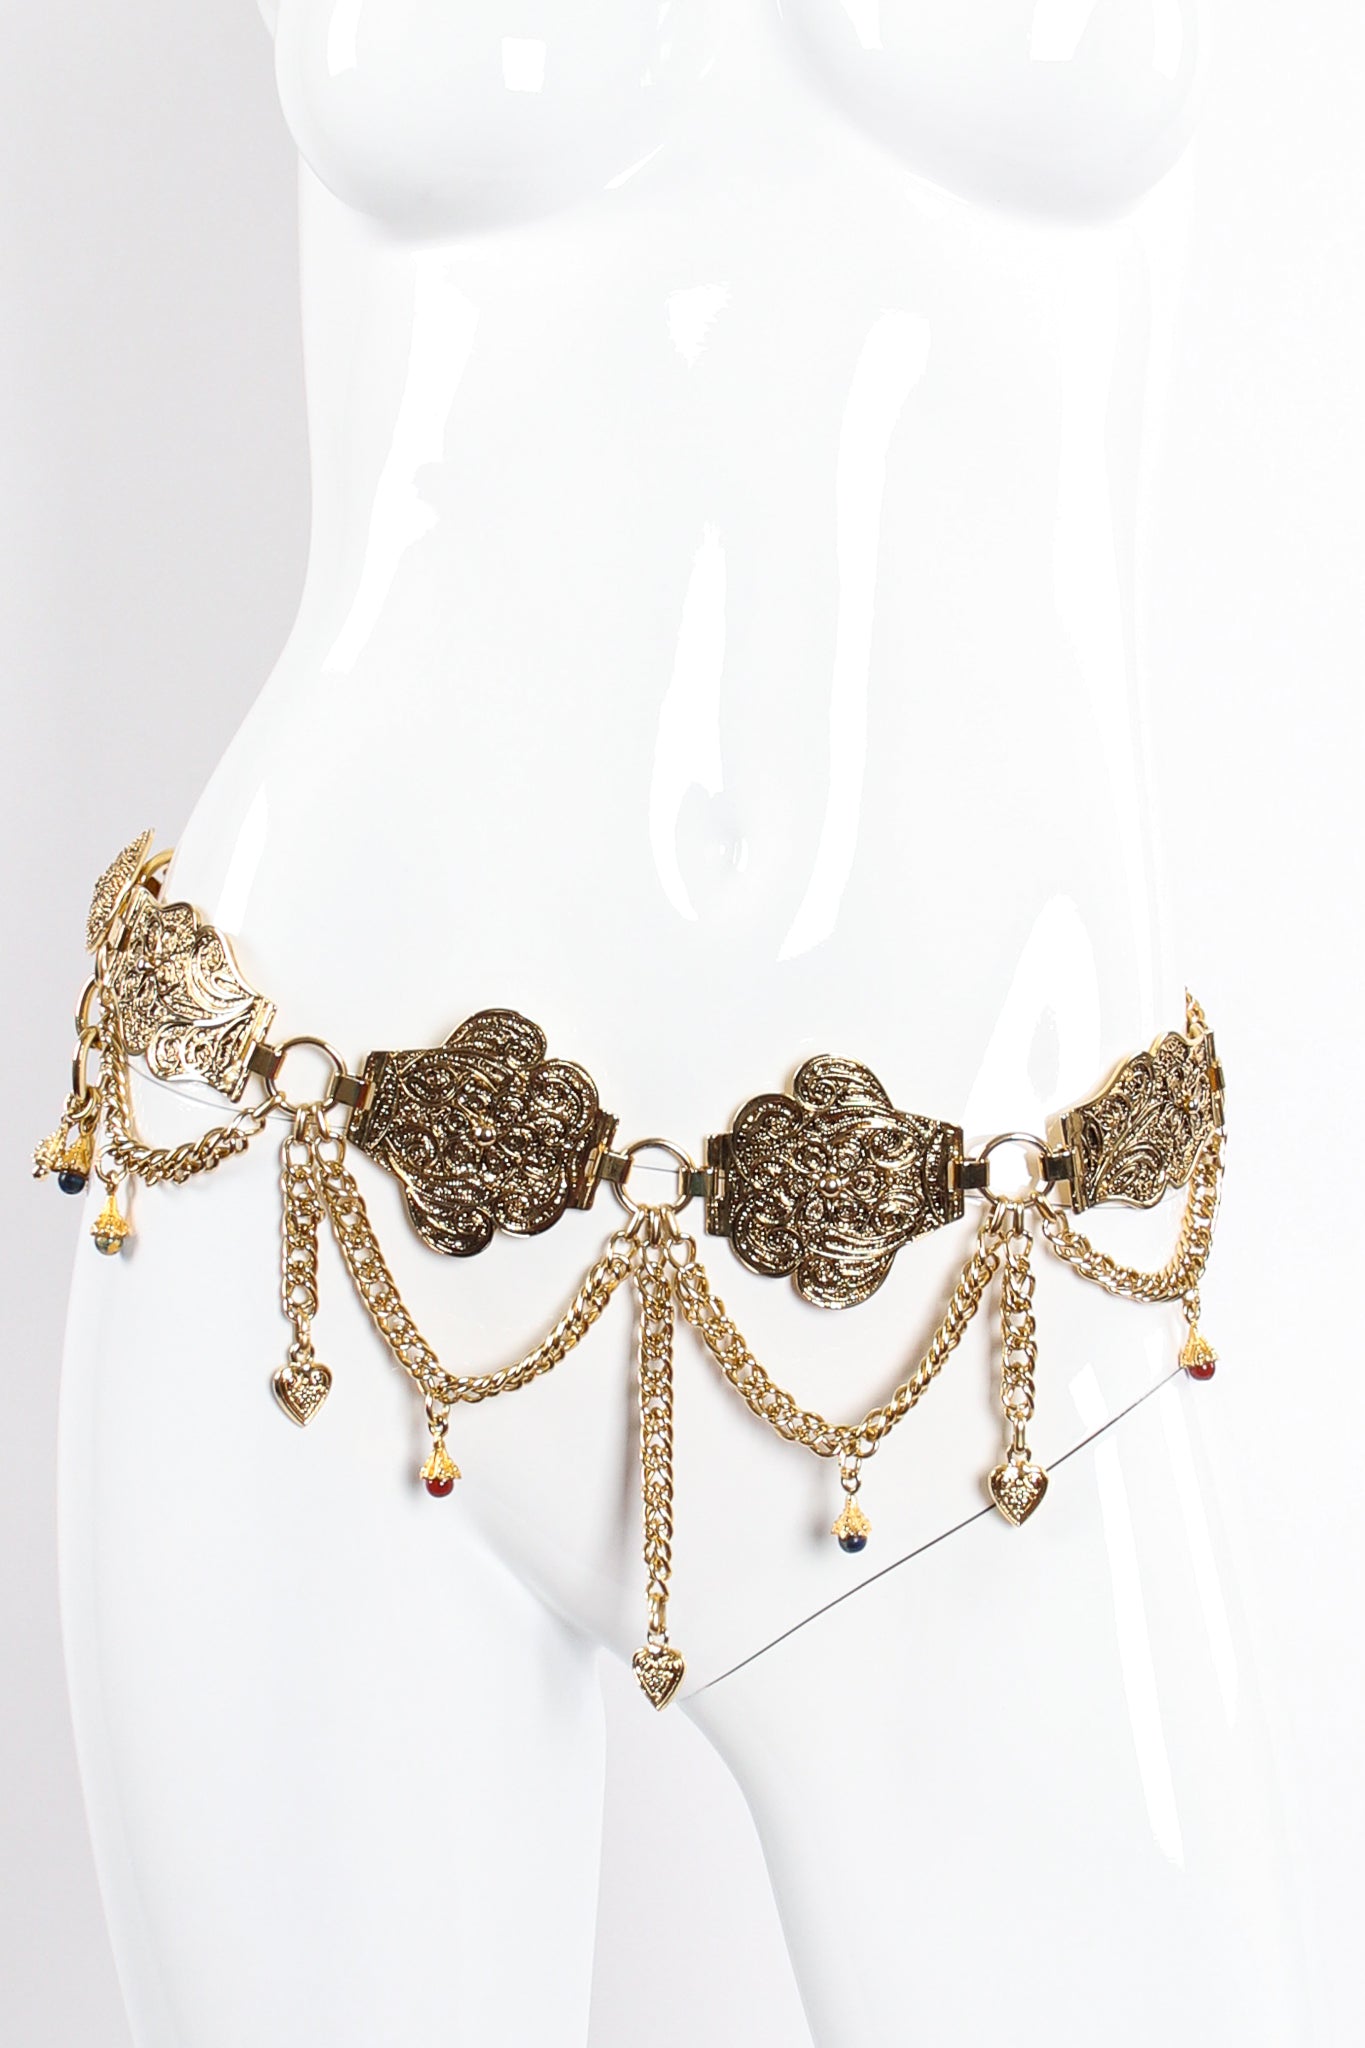 Vintage Italian Gold Filigree Draped Chain Belt on mannequin hip at Recess Los Angeles